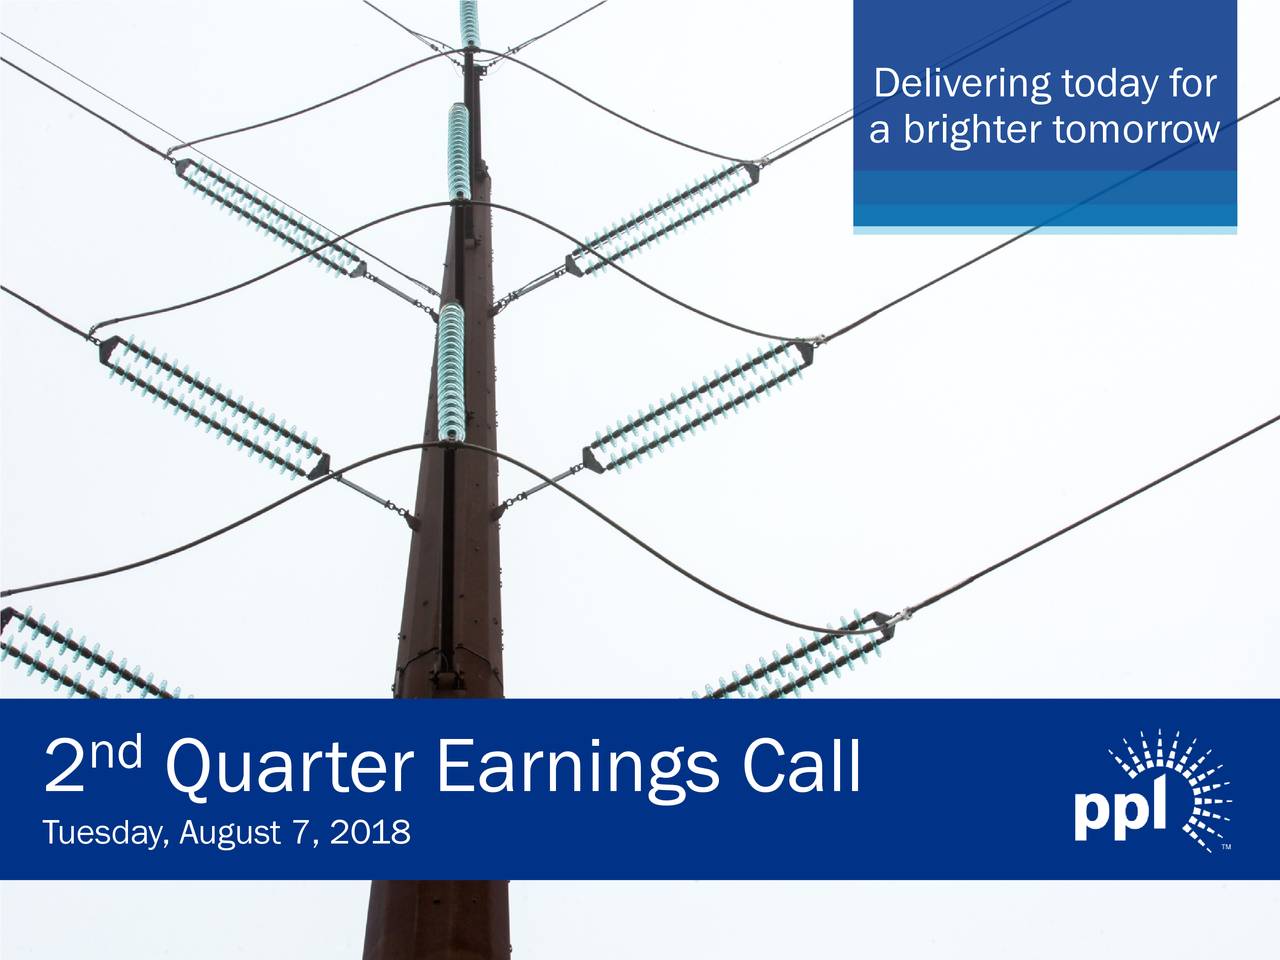 a brighter tomorrow nd 2 Quarter Earnings Call Tuesday, August 7, 2018